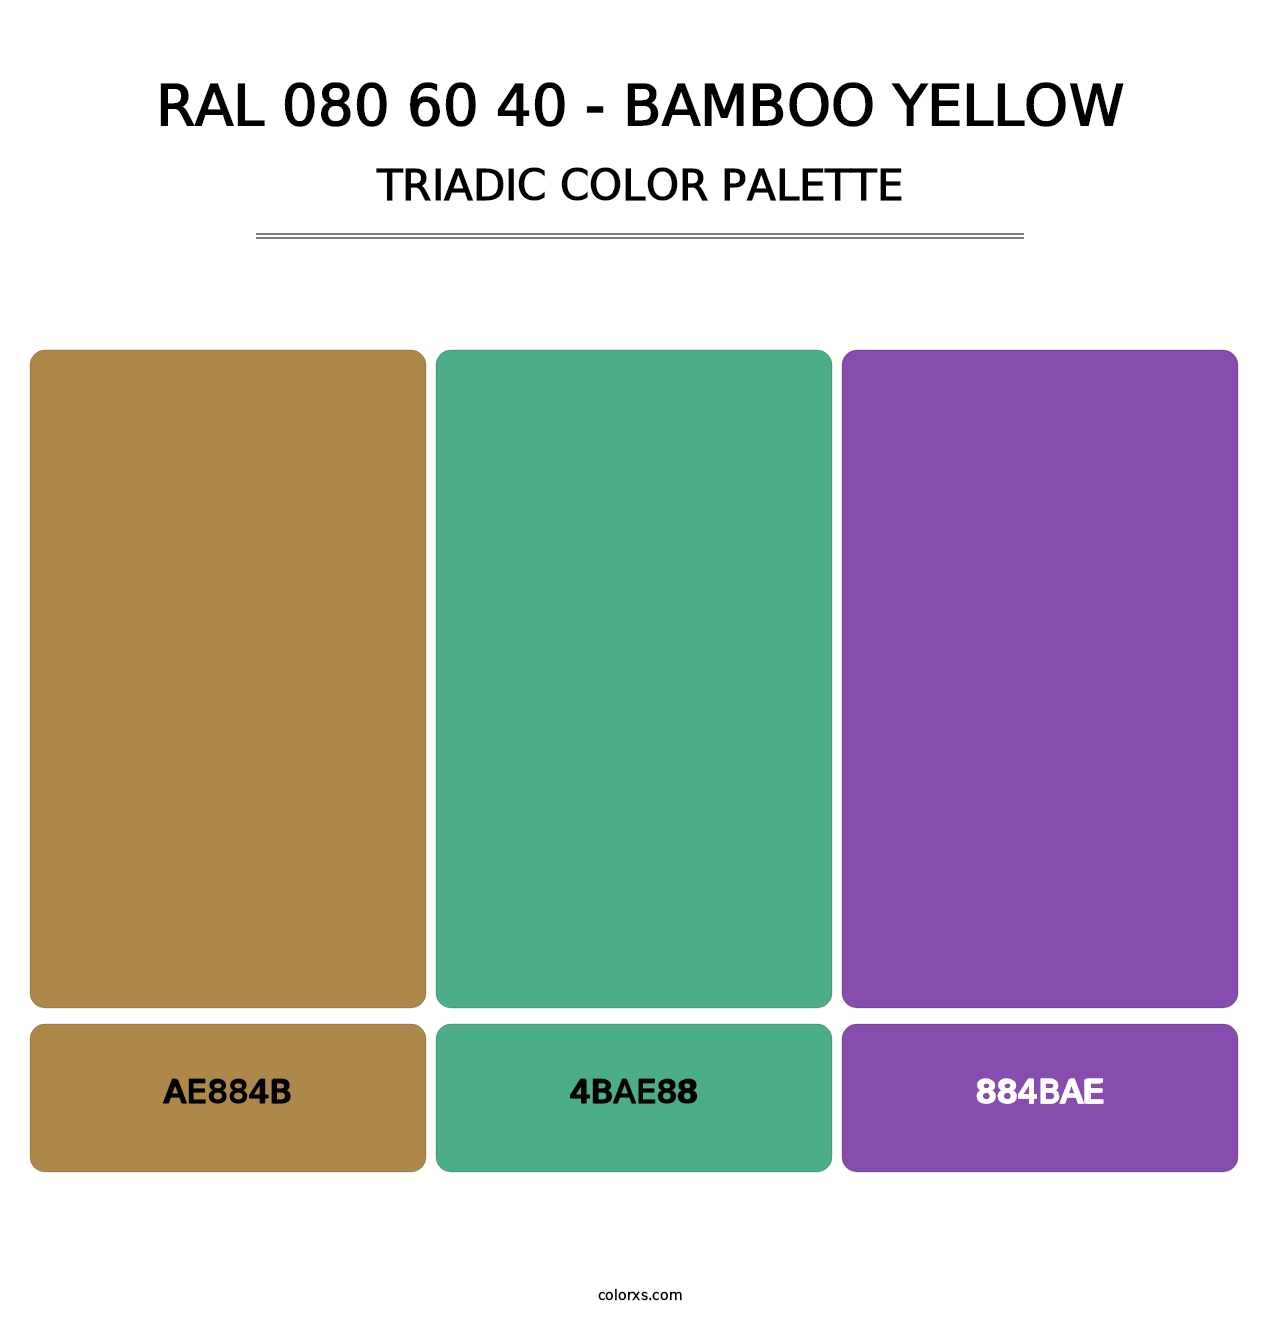 RAL 080 60 40 - Bamboo Yellow - Triadic Color Palette